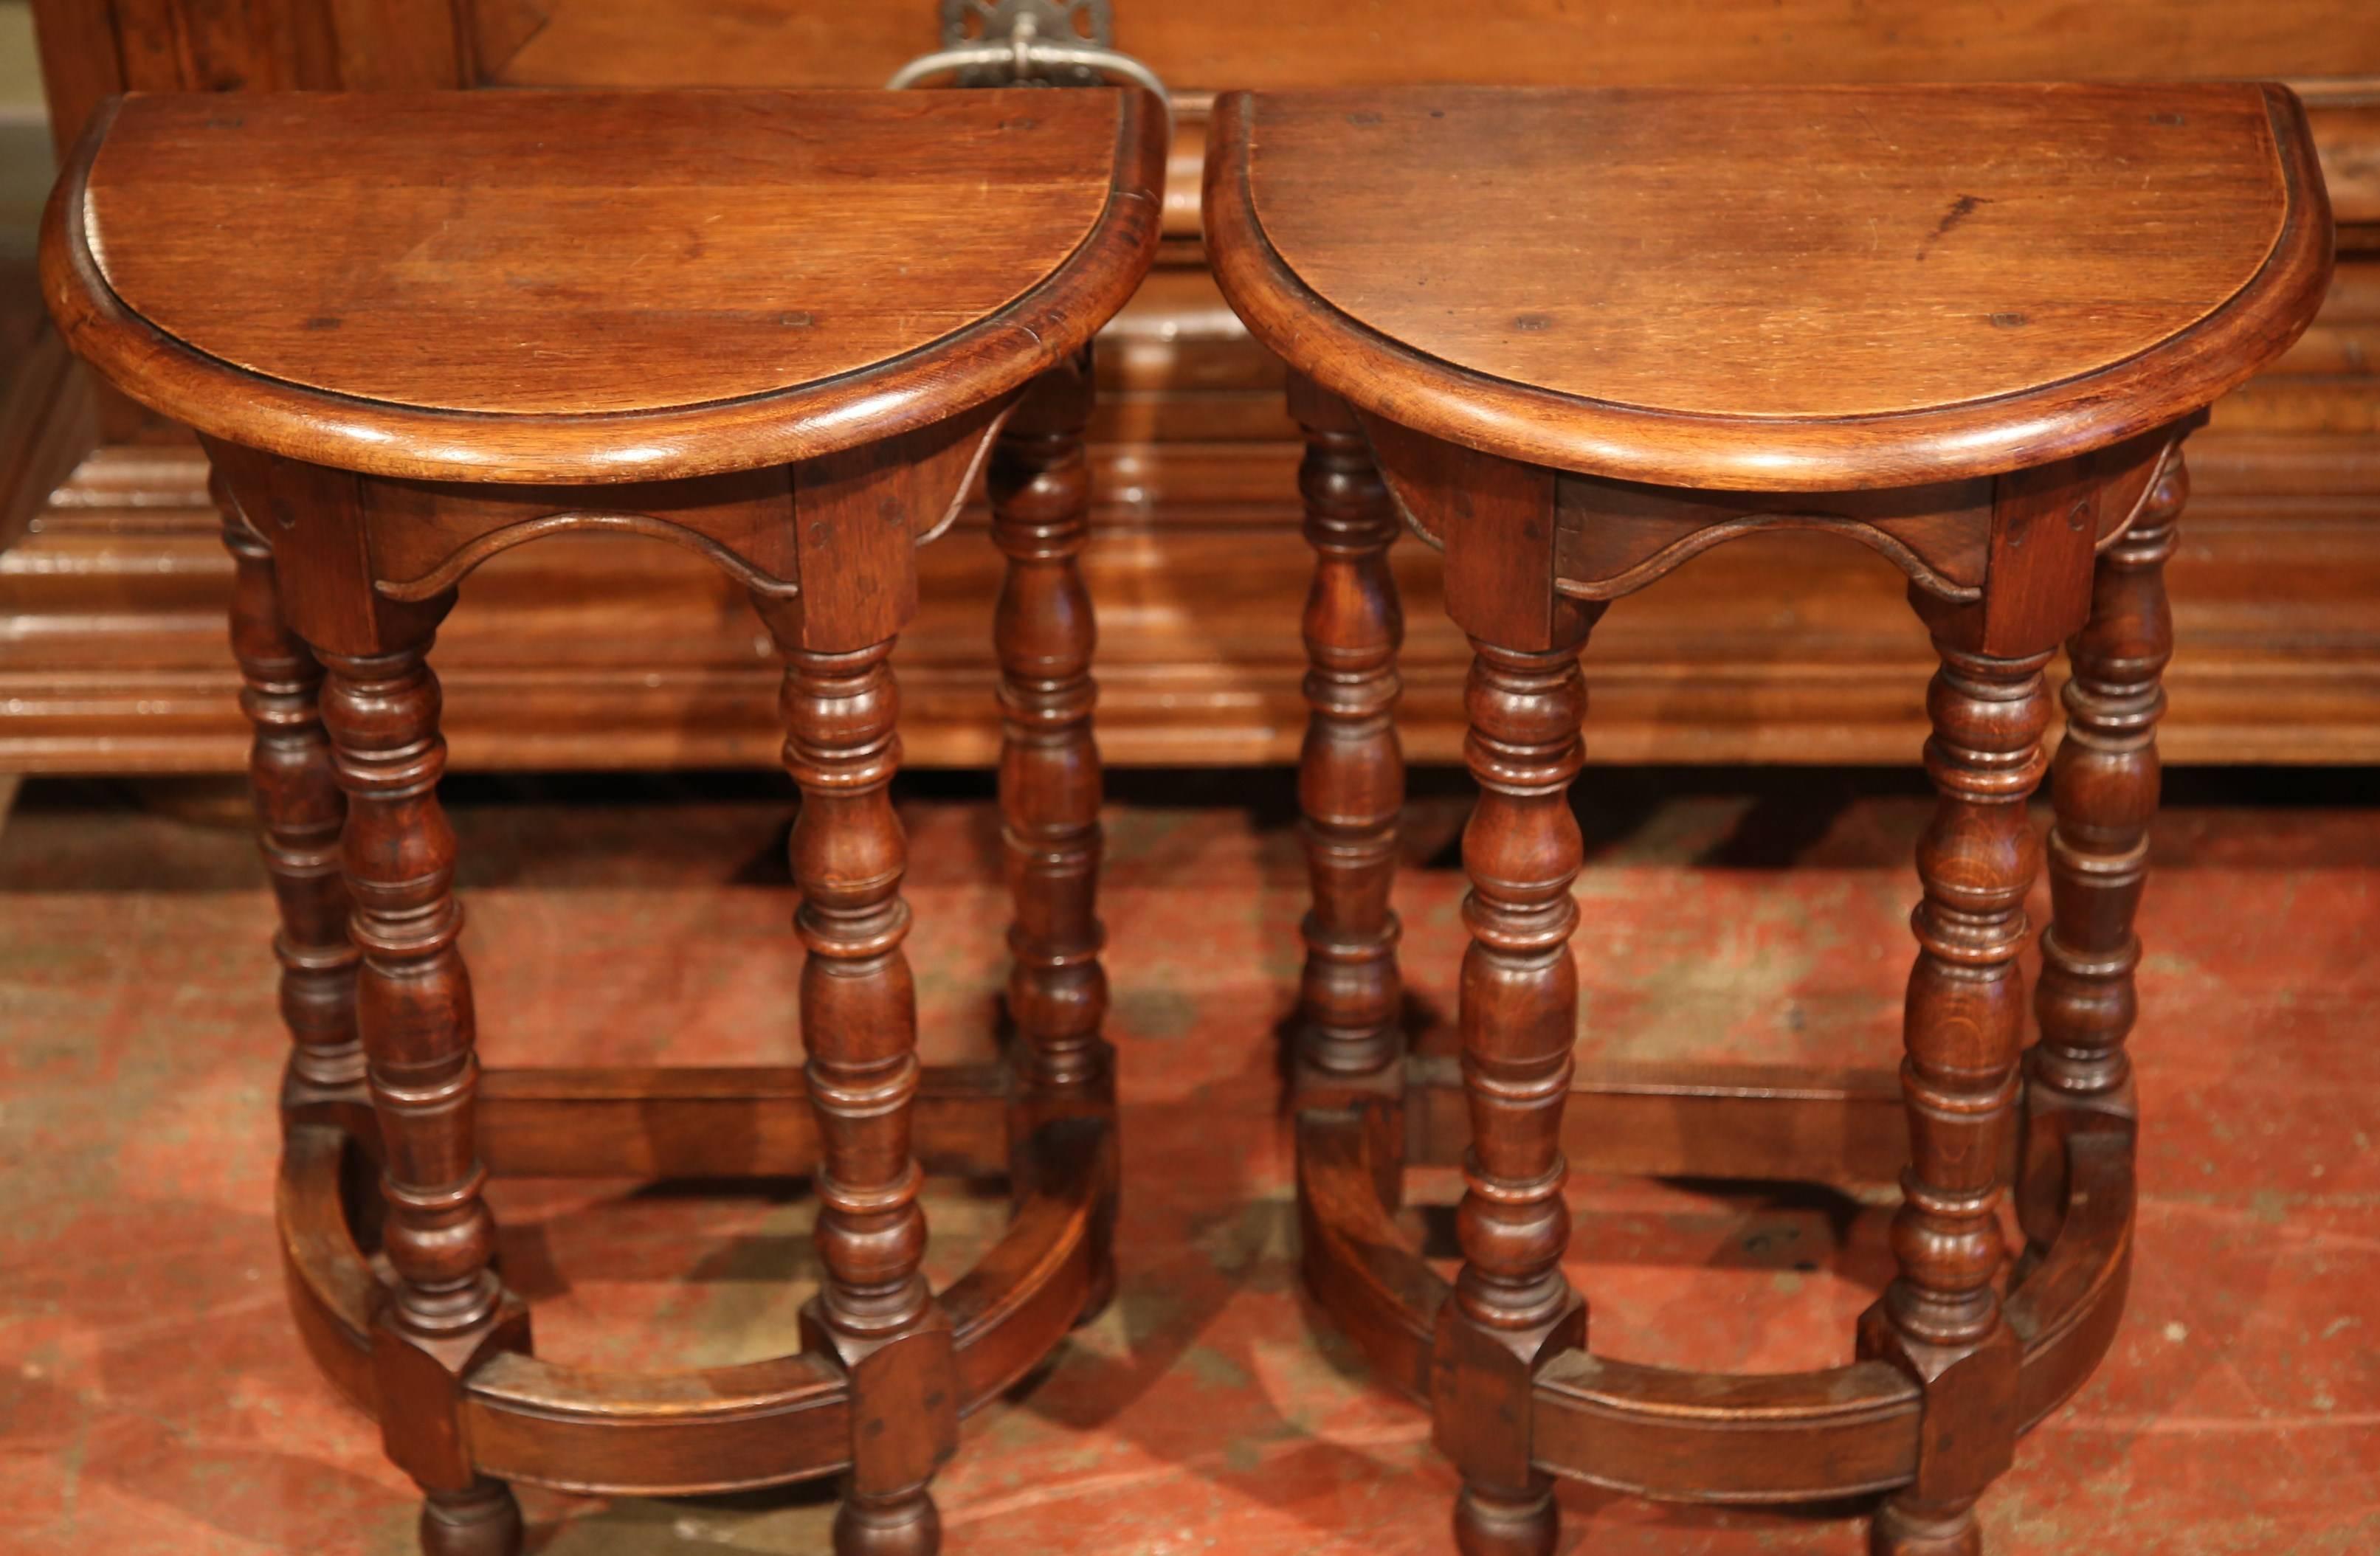 This fine pair of fruitwood side tables was carved in France, circa 1930. Each table is shaped as a semicircle with four turned legs and a half circle stretcher. The Classic, wood occasional tables are in excellent condition with a rich walnut